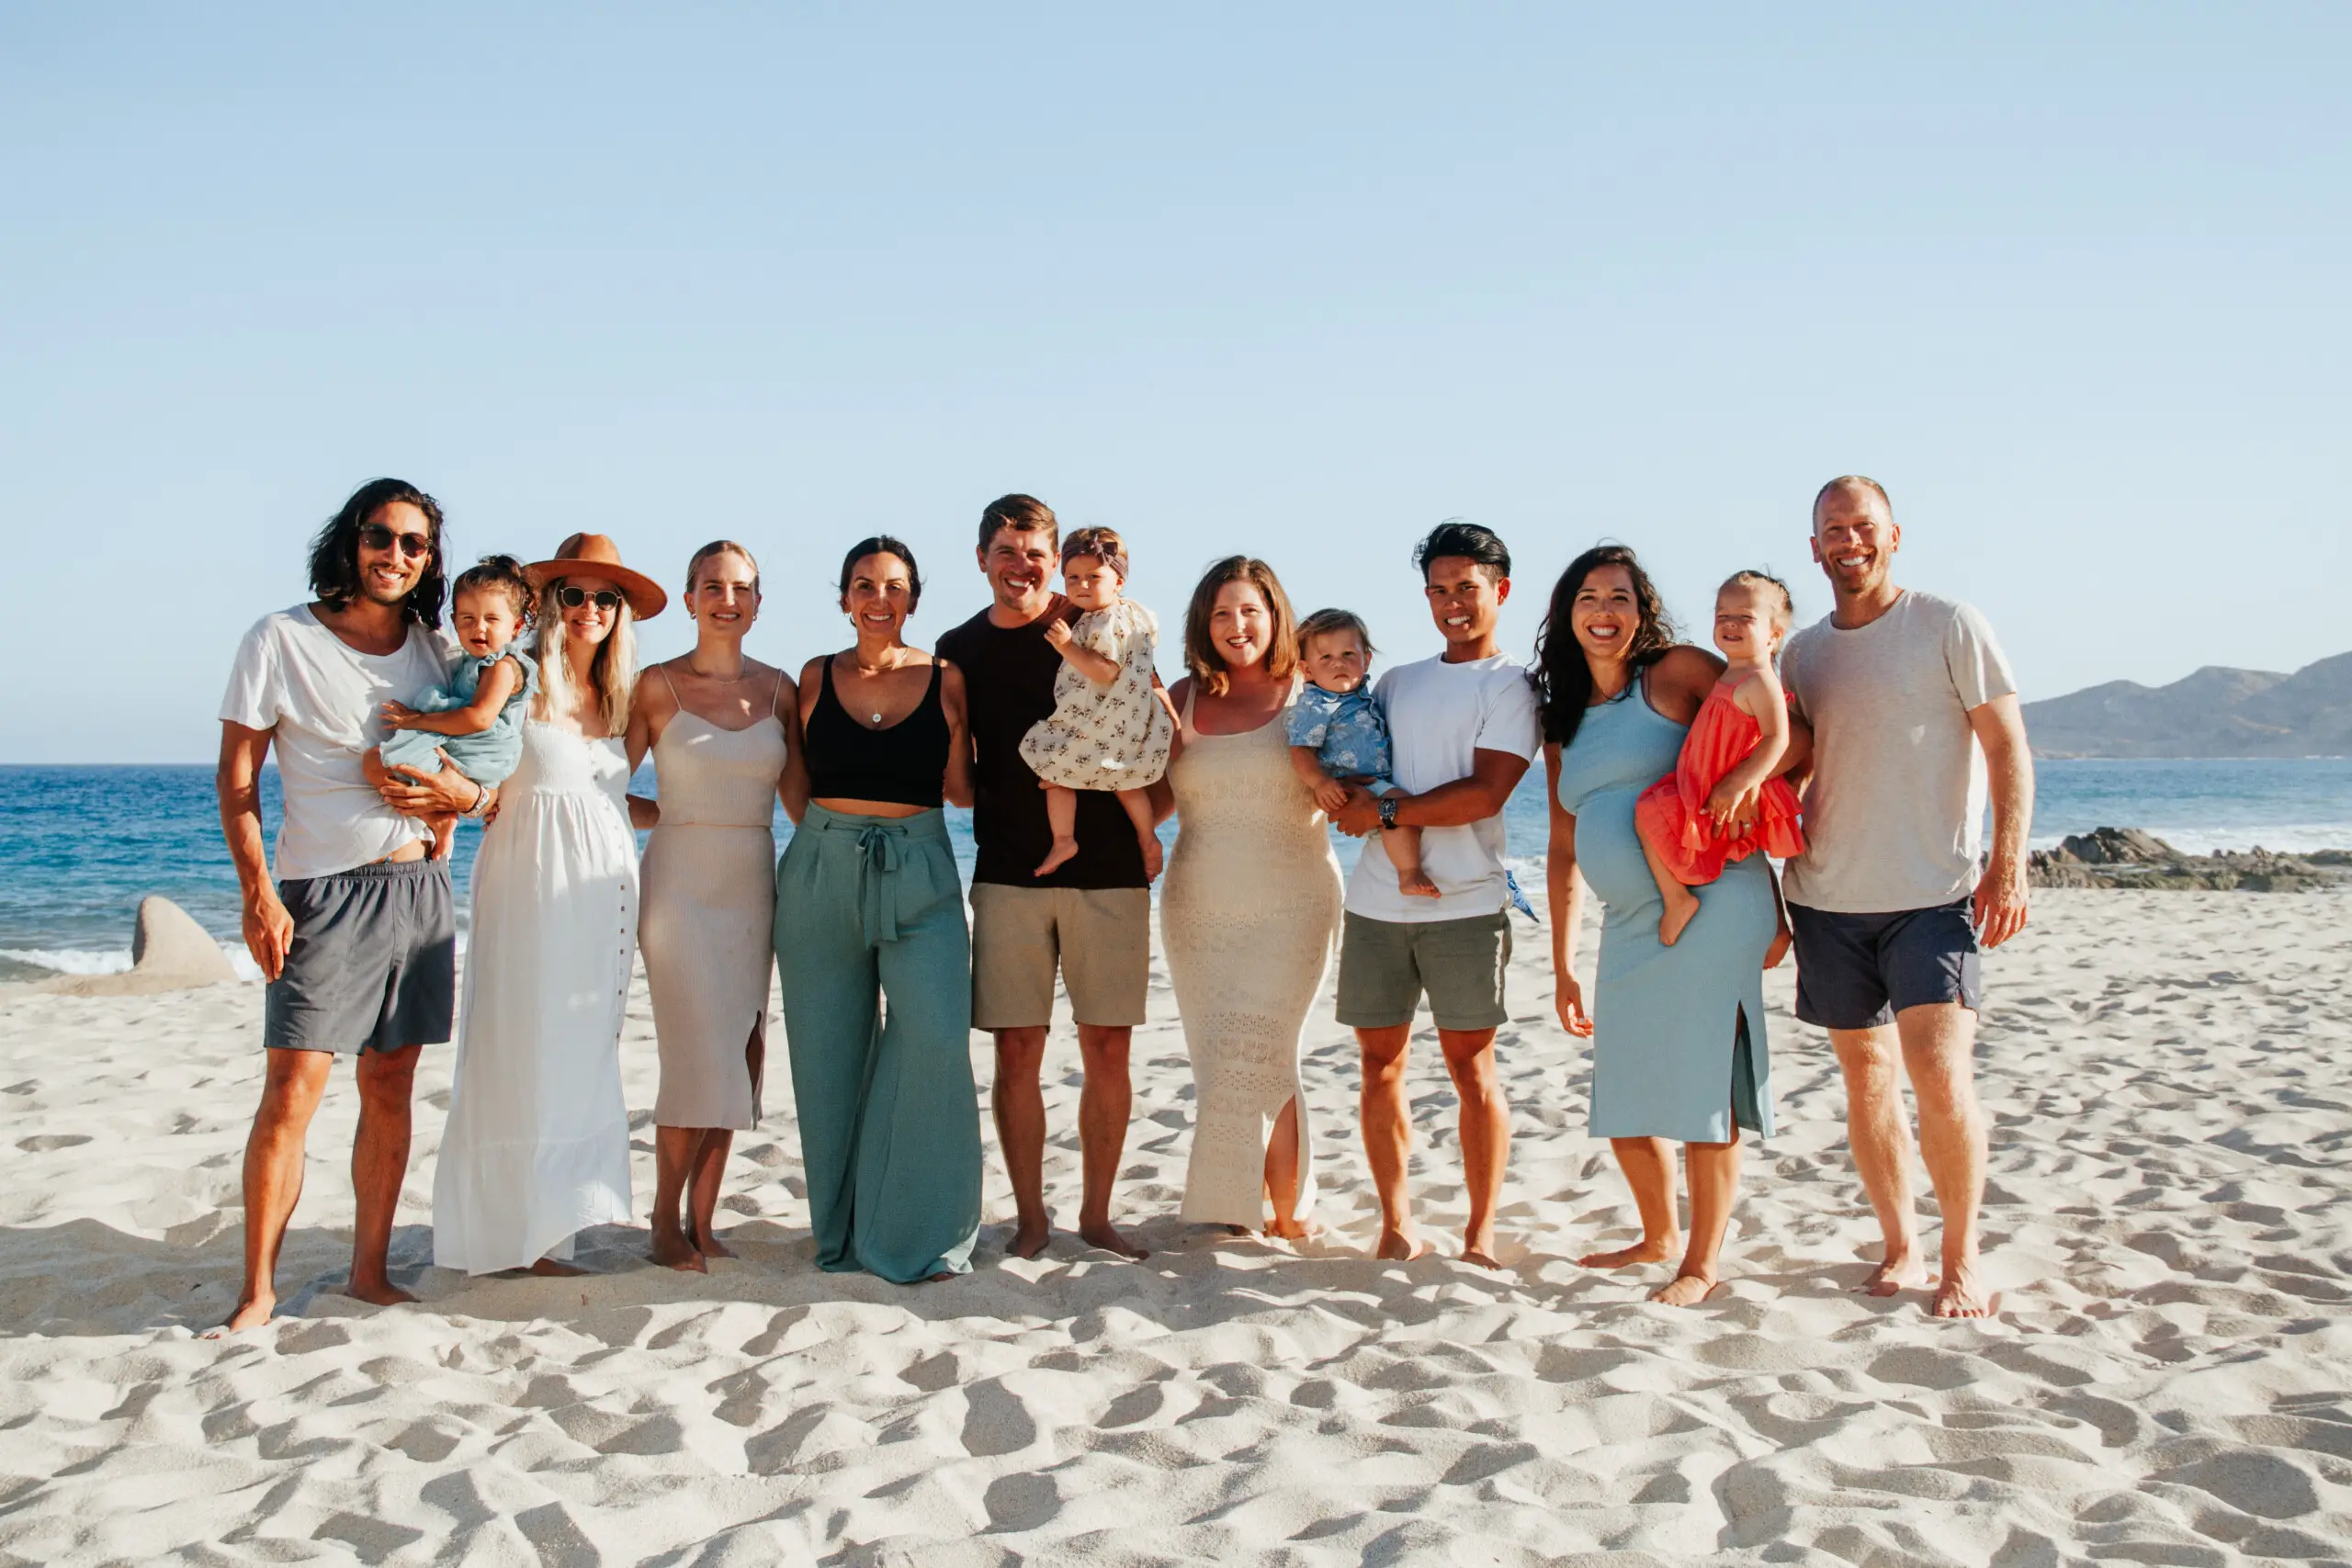 Friends' photoshoot by Romina, Localgrapher in Cabo San Lucas